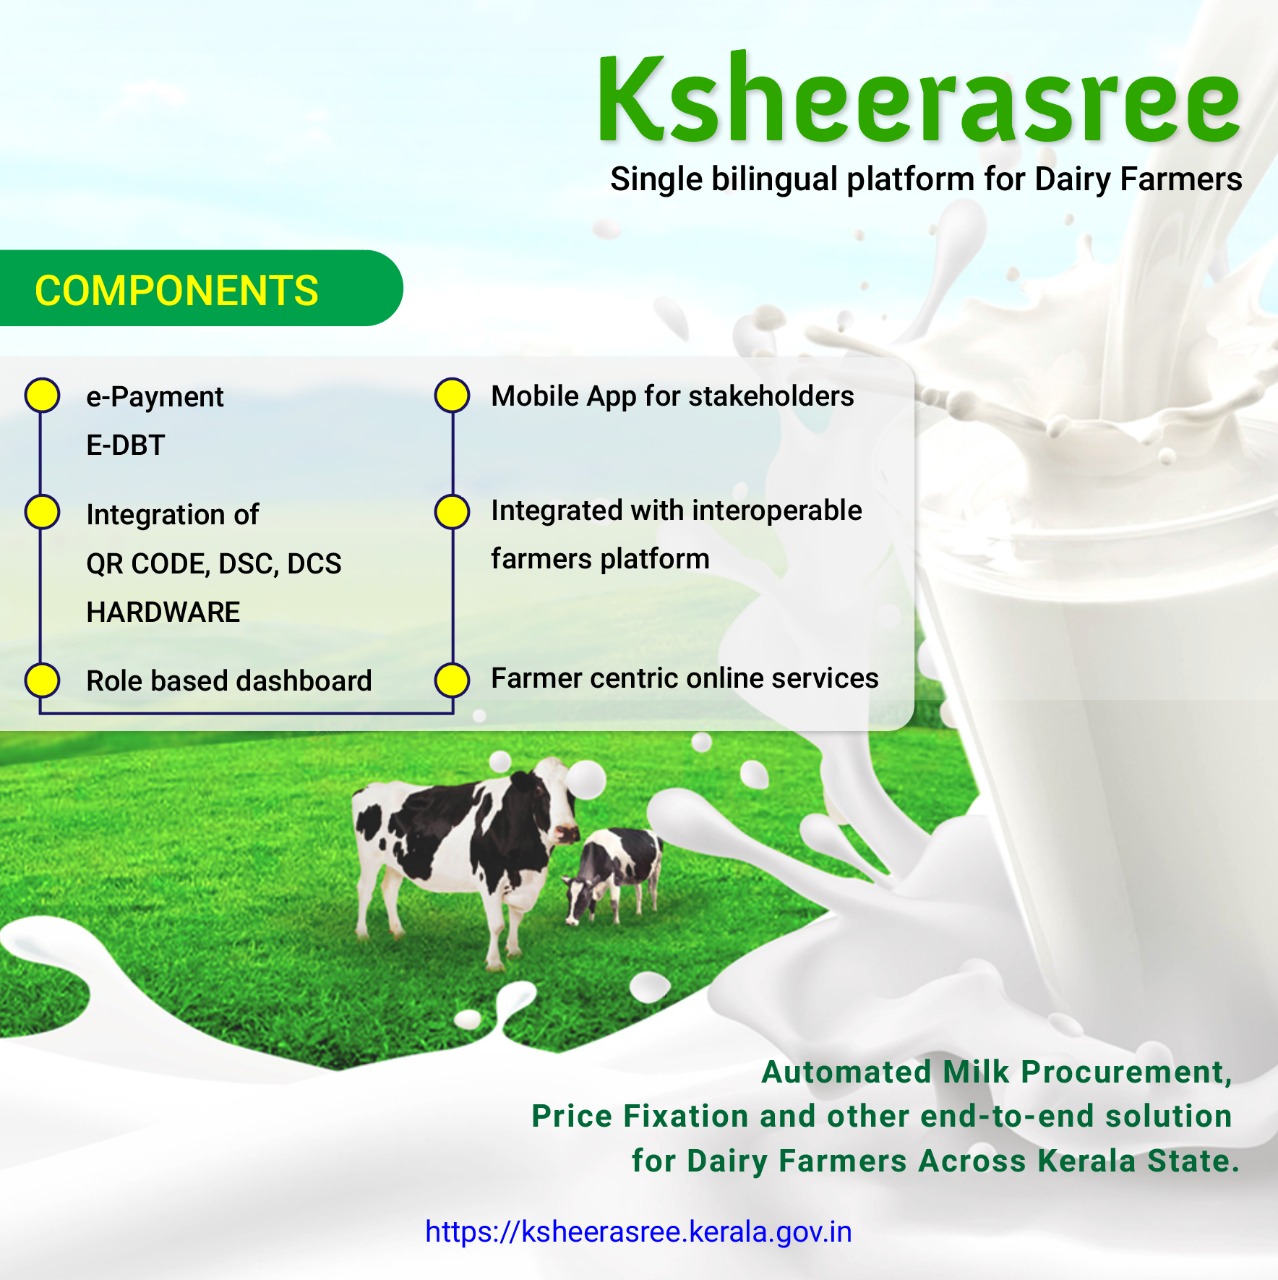 Image of Ksheerasree – a unified web-enabled application developed by NIC, provides end-to-end solutions to the Dairy Cooperative Societies, Dairy Farmers, Dairy Development Department, Milma, and other known stakeholders across Kerala State.